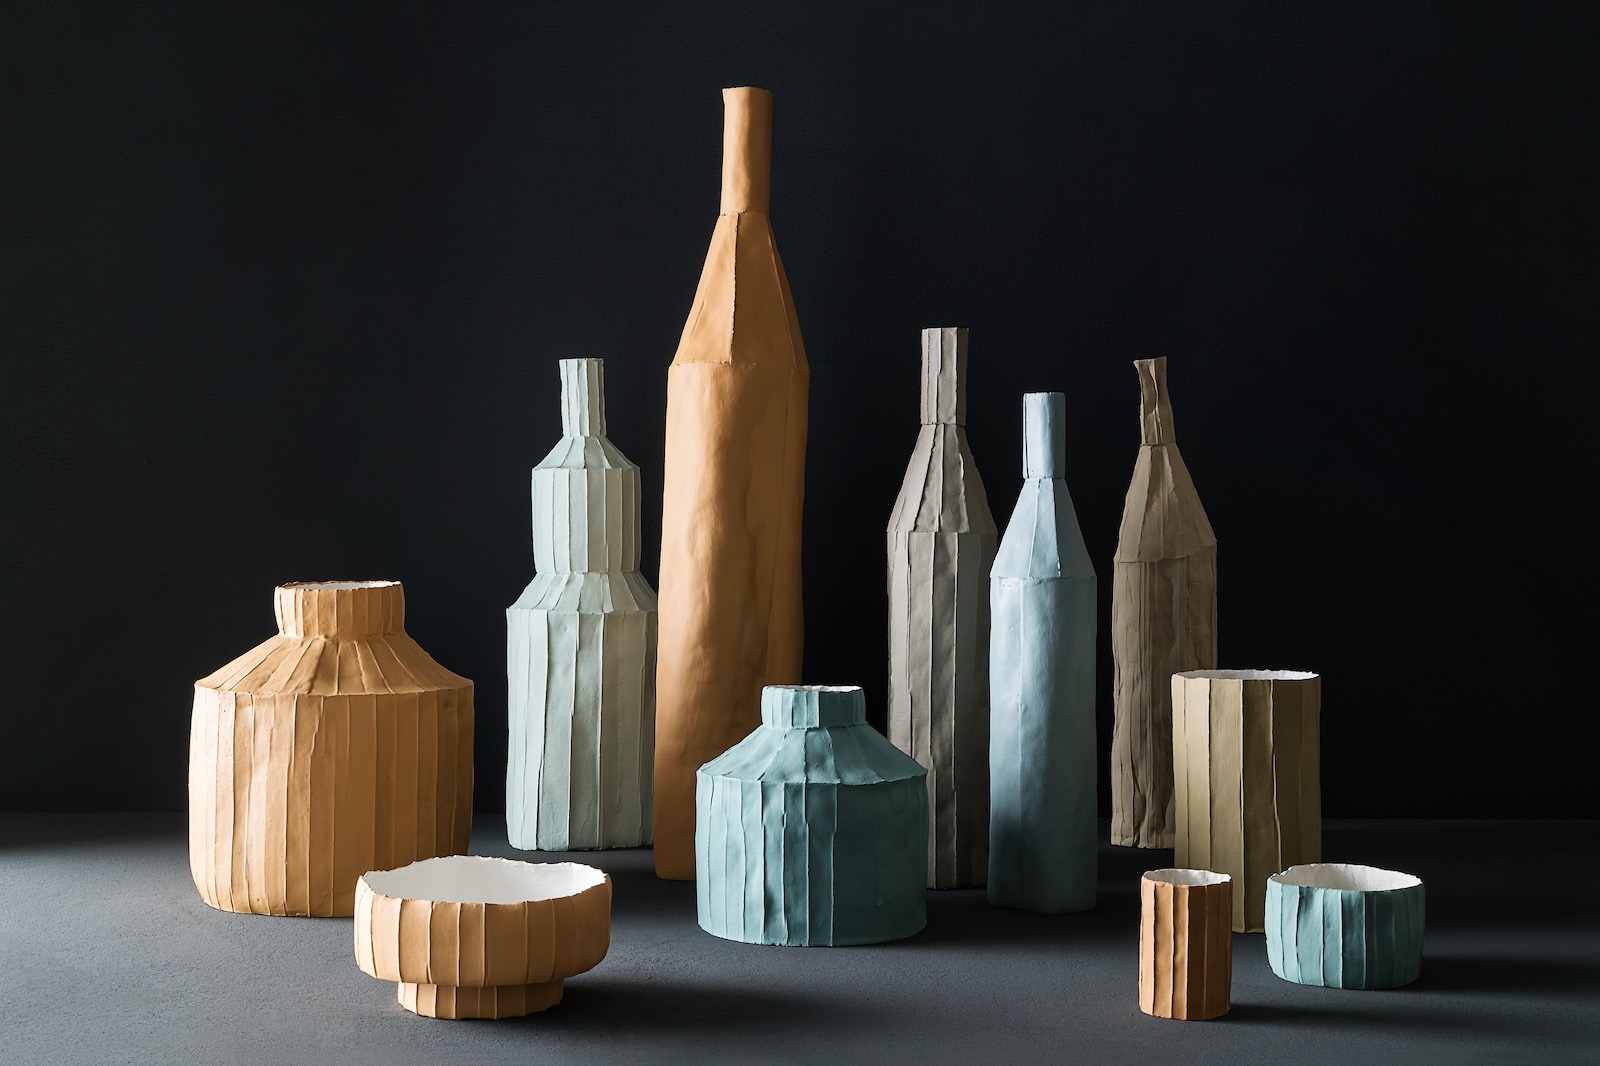 Trending: Paper Clay By Paola Paronetto – Warehouse Home